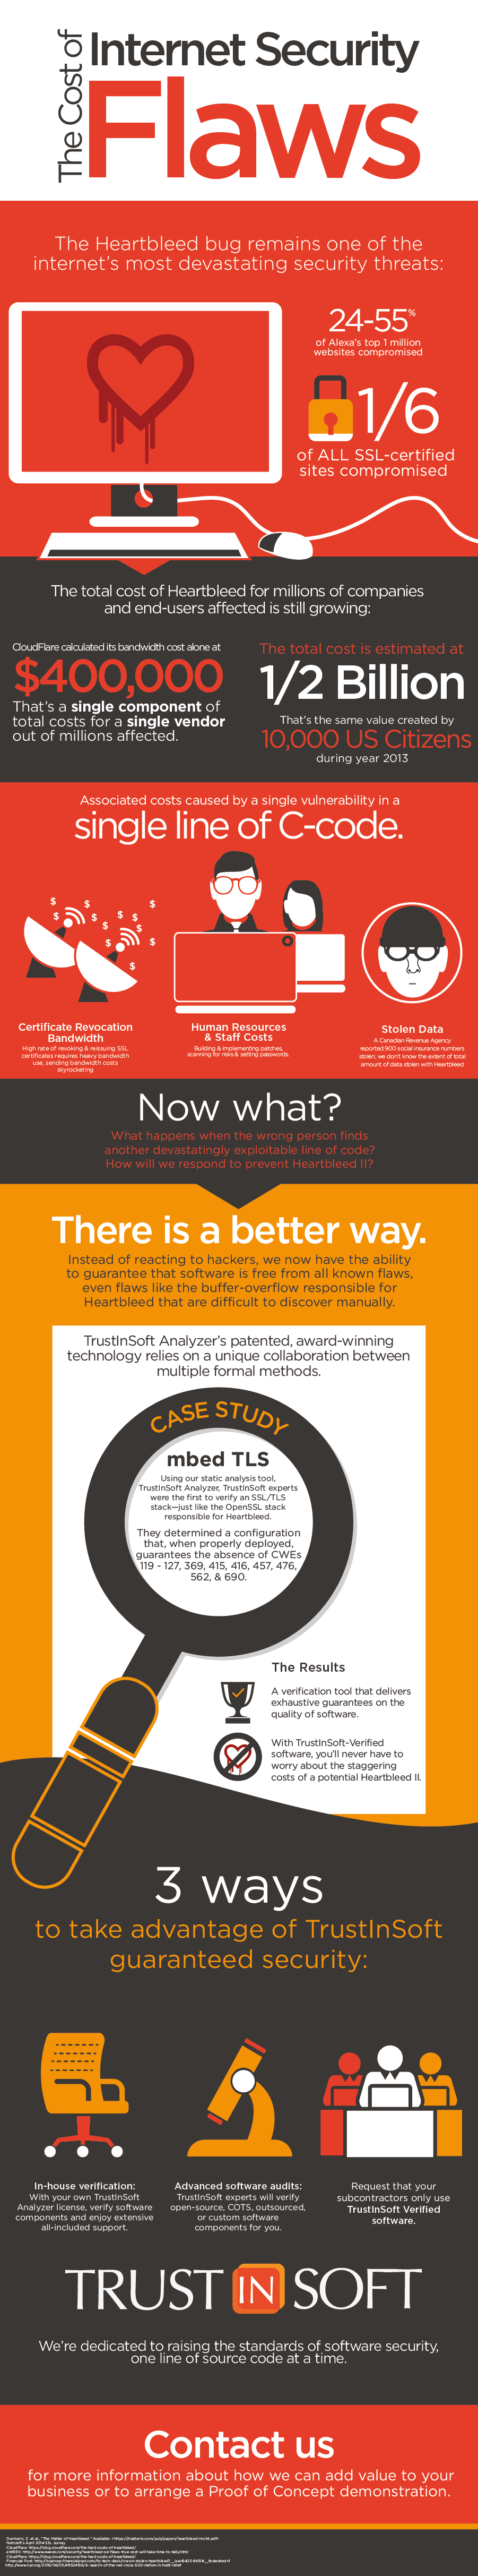 TrustInSoft infographic on the heartbleed bug